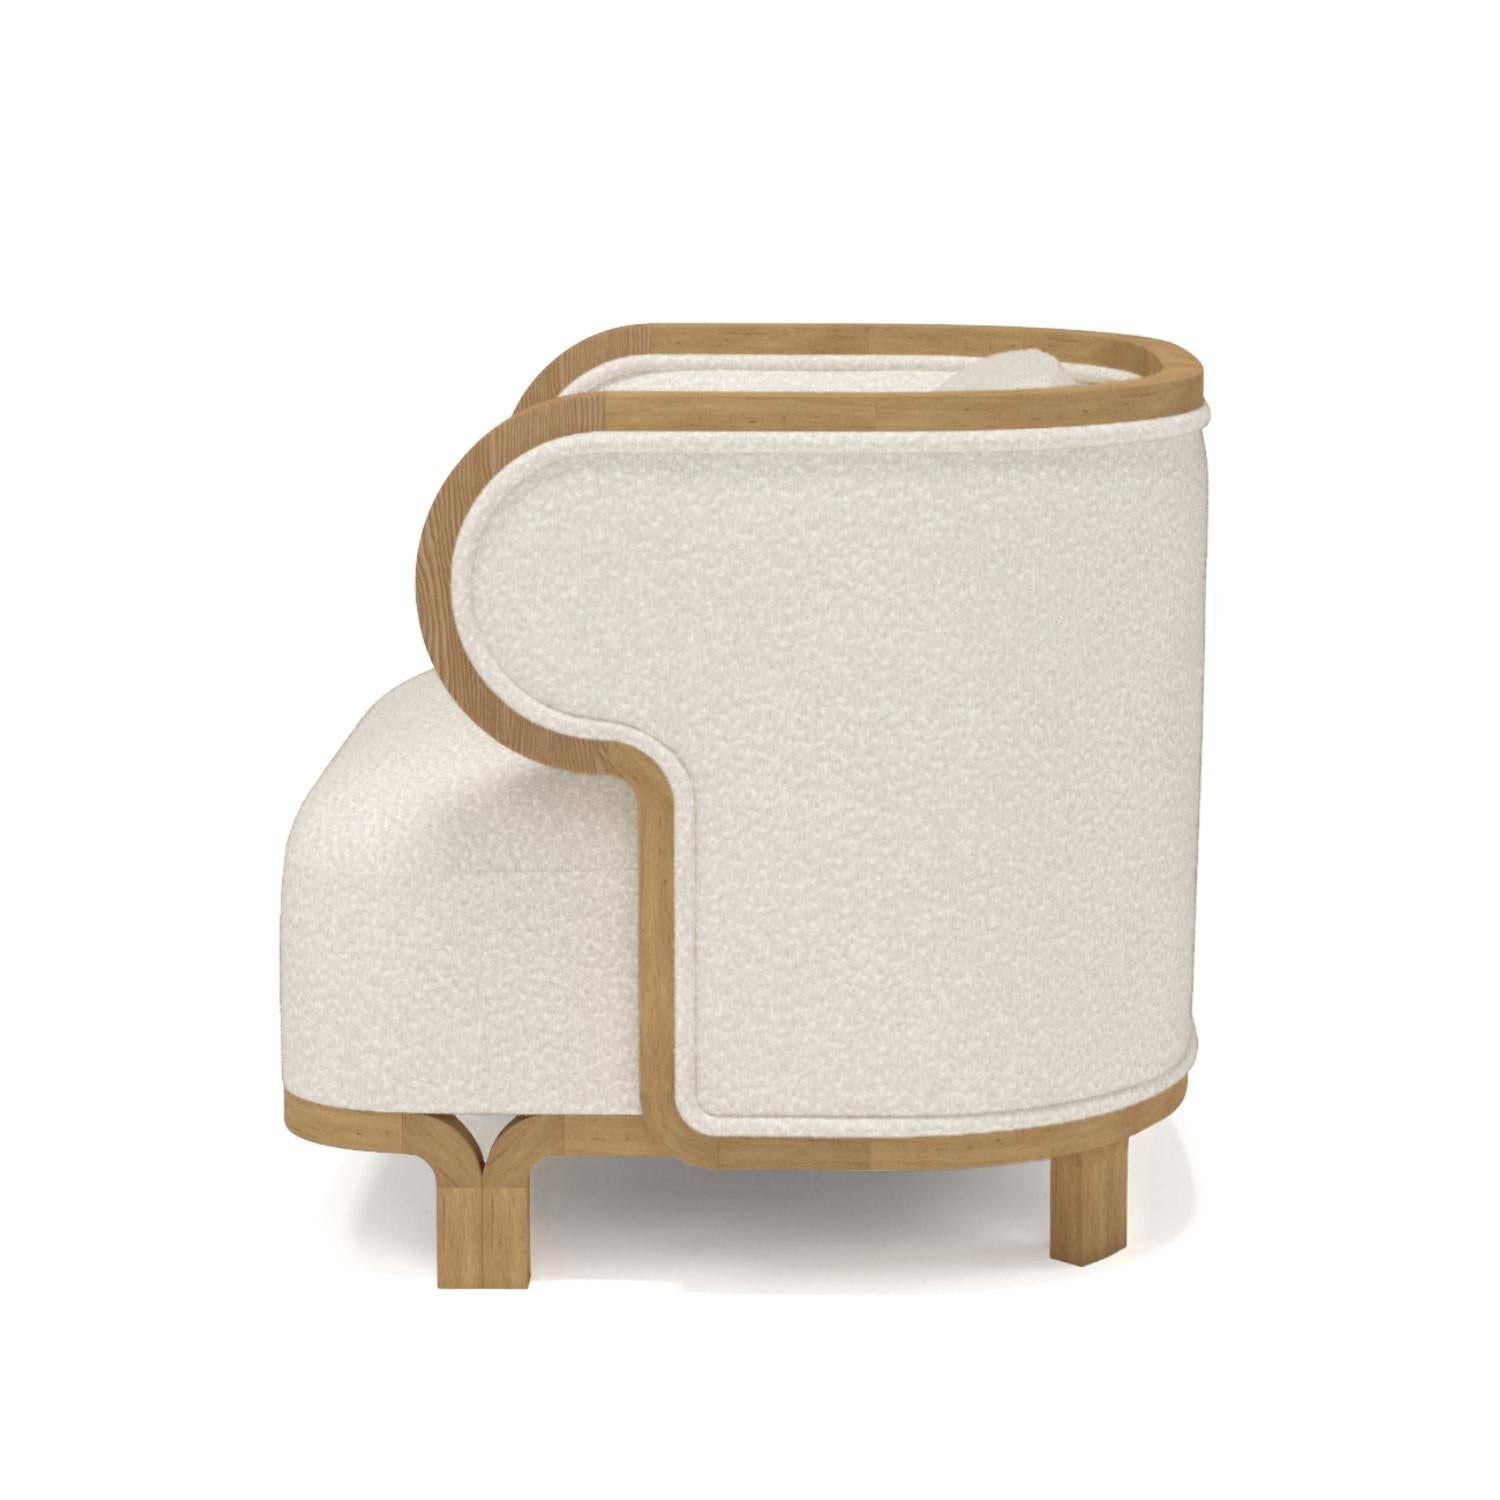 Odette Oak Club Chair by Fred and Juul
Dimensions: D 63 x W 66 x H 57 cm.
Materials: Oak and wool.

Available in different oak finishes and wool colors. Custom sizes, materials or finishes are available. Please contact us.

The Odette club chair is